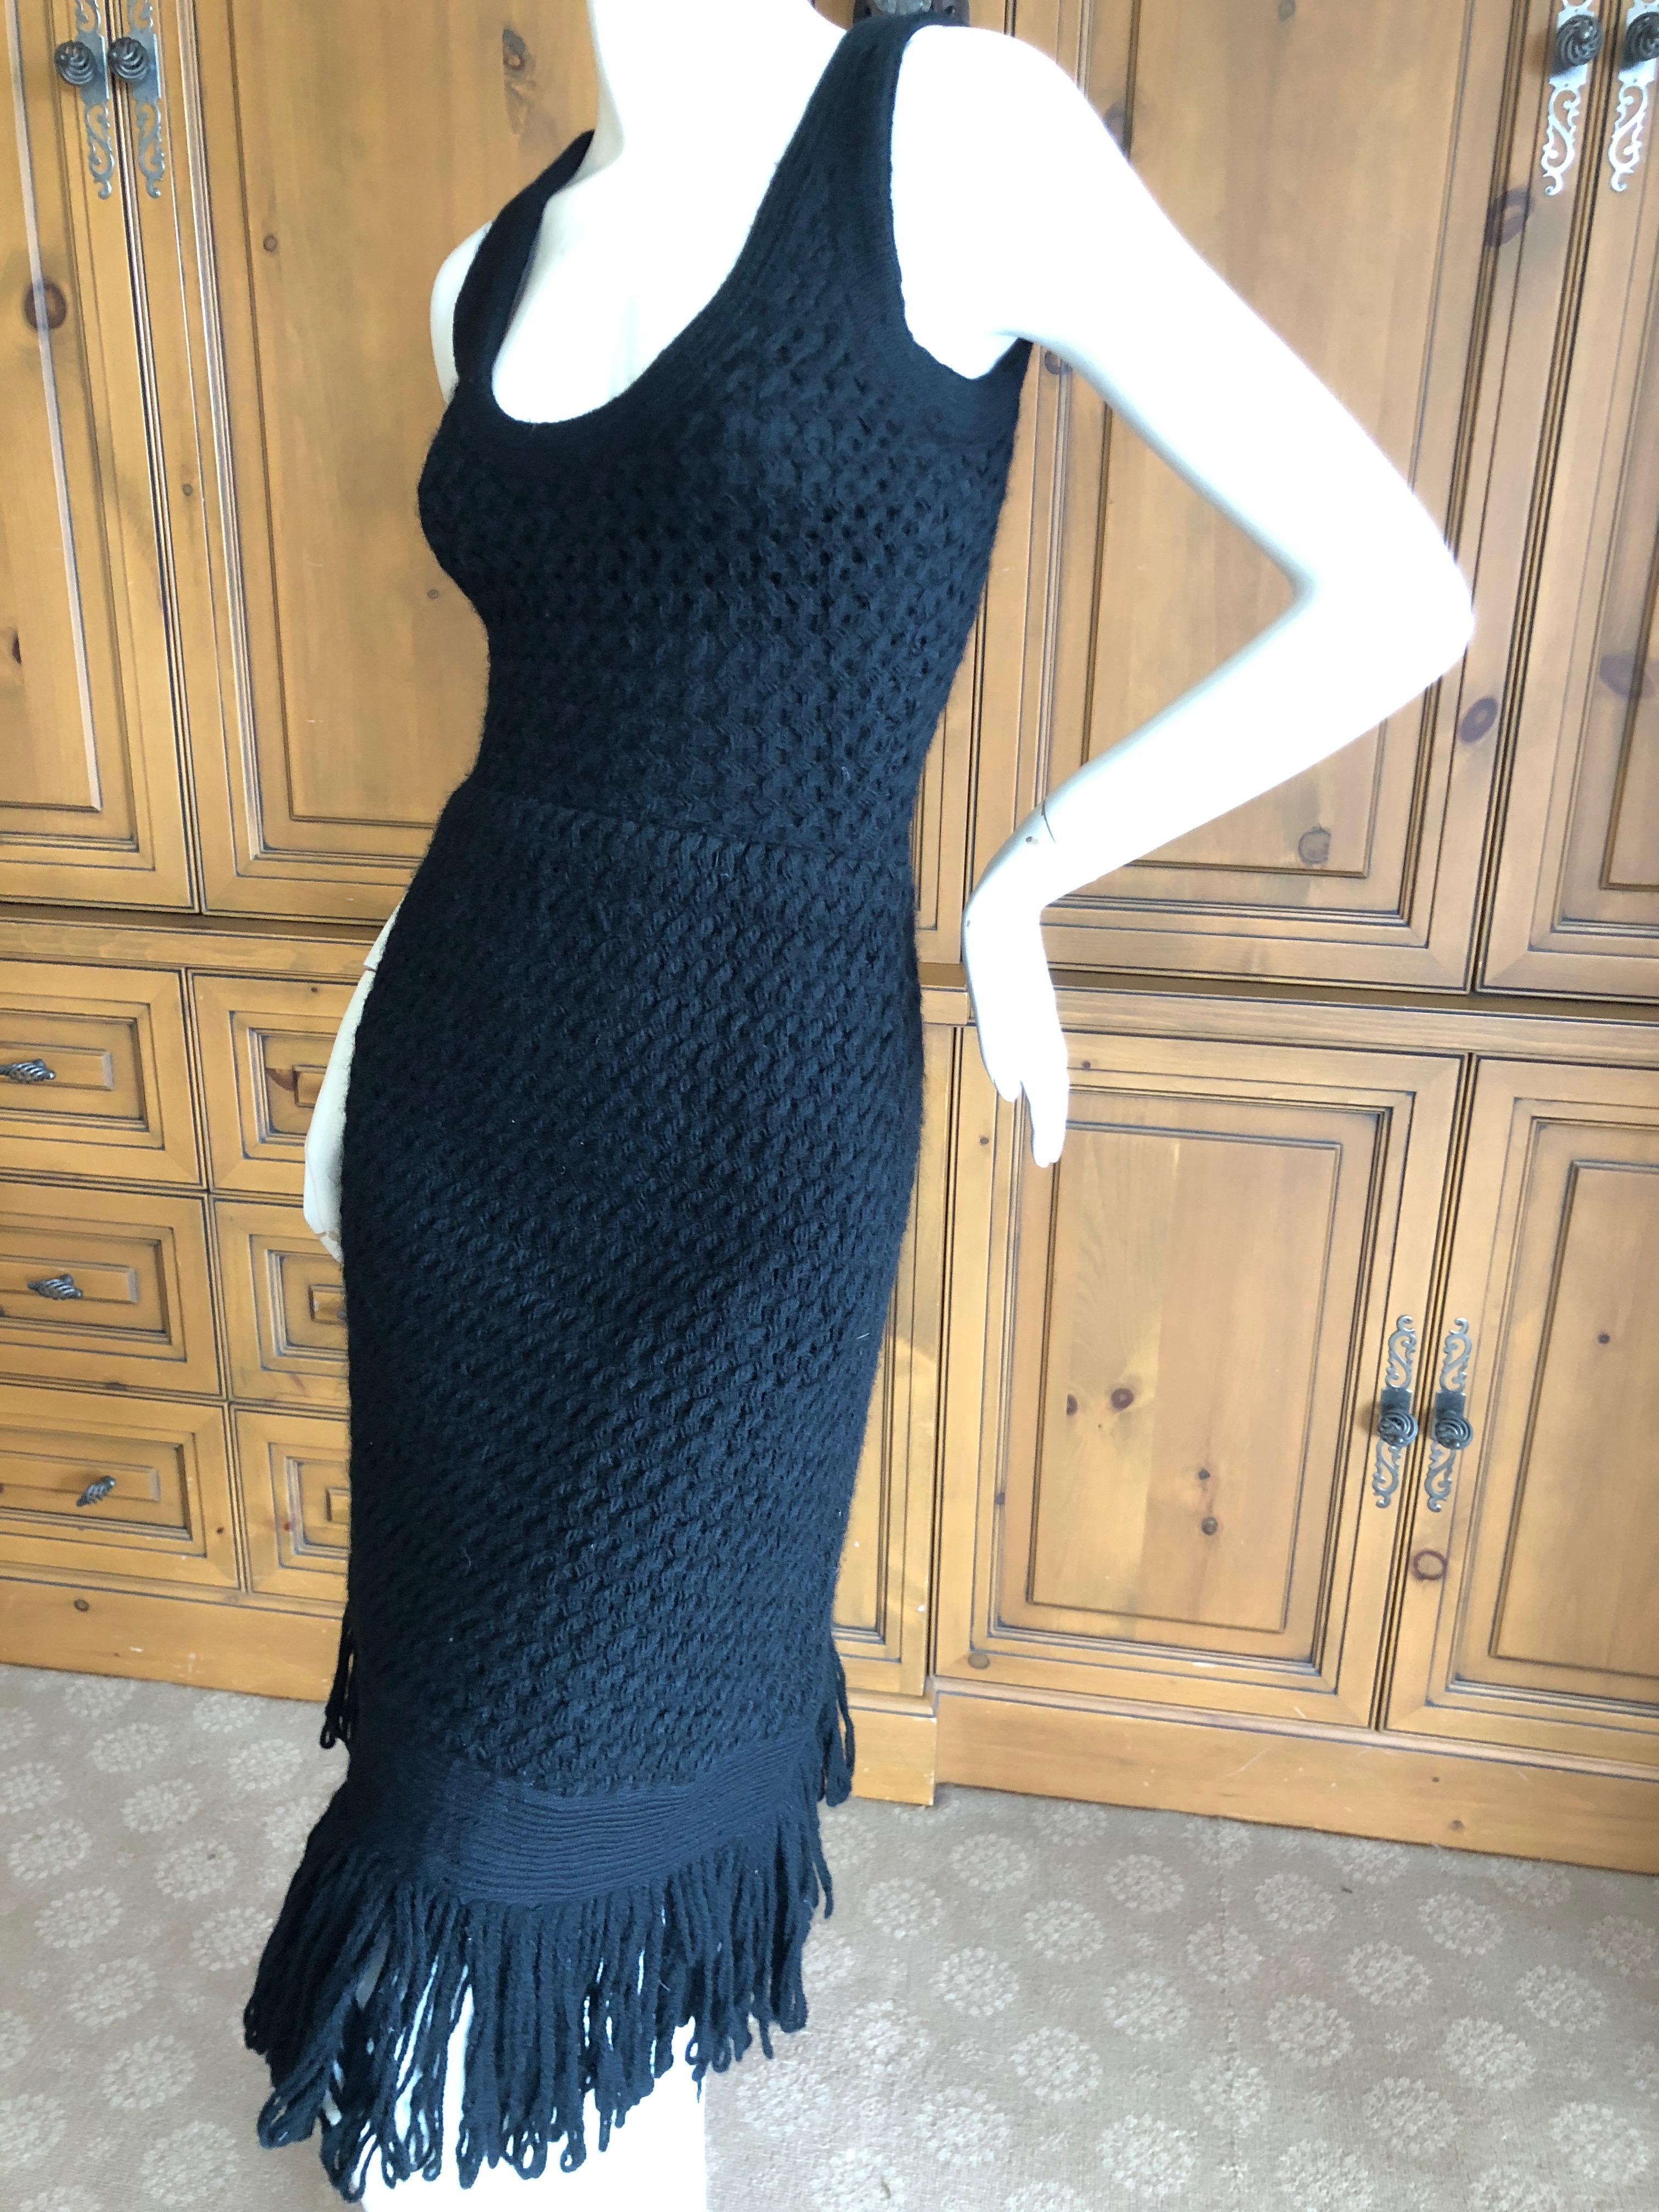 Cardinali Black Silk Lined Crochet Dress with Matching Fringed Shawl Fall 1971 

From the Archive of Marilyn Lewis, the creator of Cardinali
Cardinali was founded in Los Angeles in 1970, by Marilyn Lewis, who had already found success as the founder